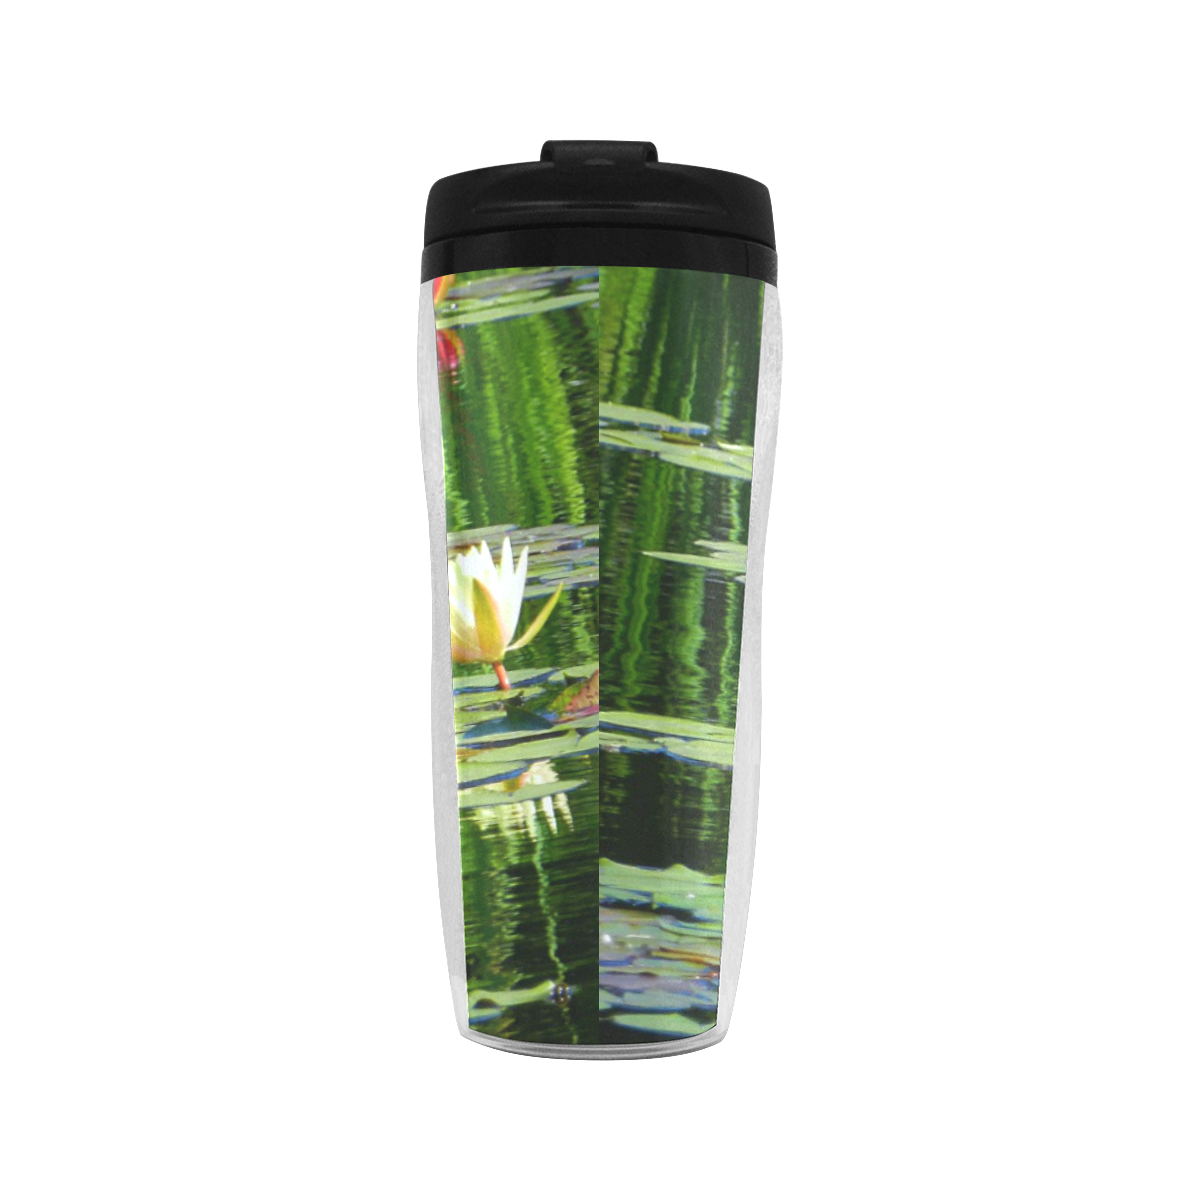 waterlilies on pond Reusable Coffee Cup (11.8oz)